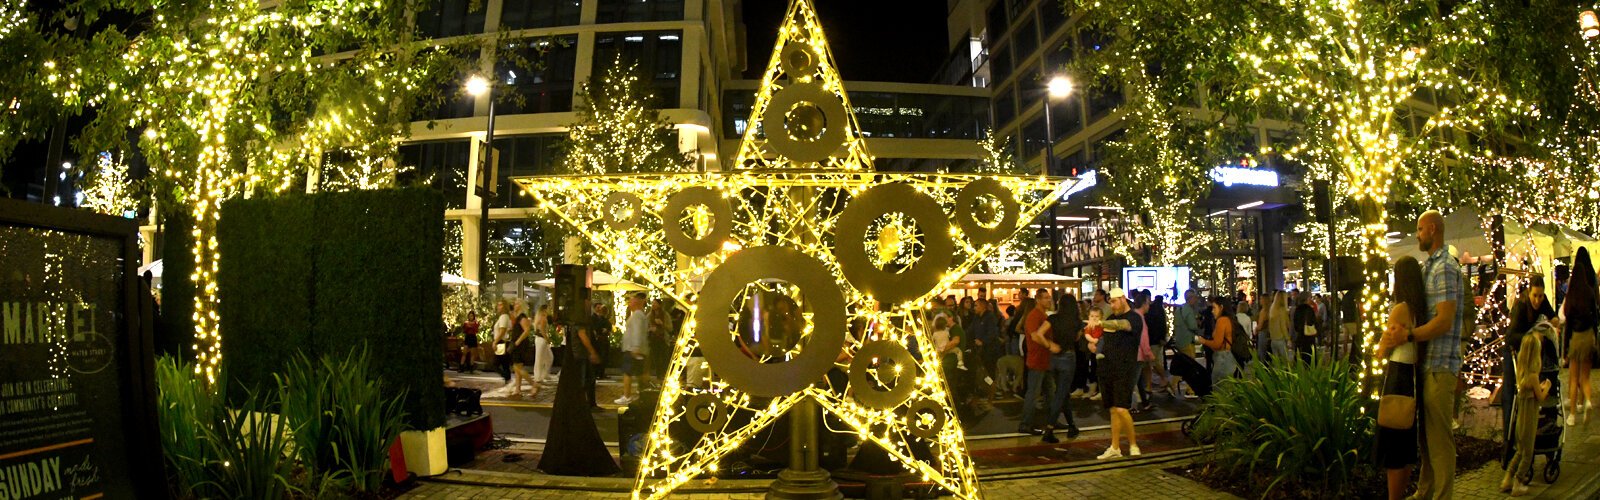 This dazzling display of golden lights kicks off a month-long of holiday events at Water Street Tampa.